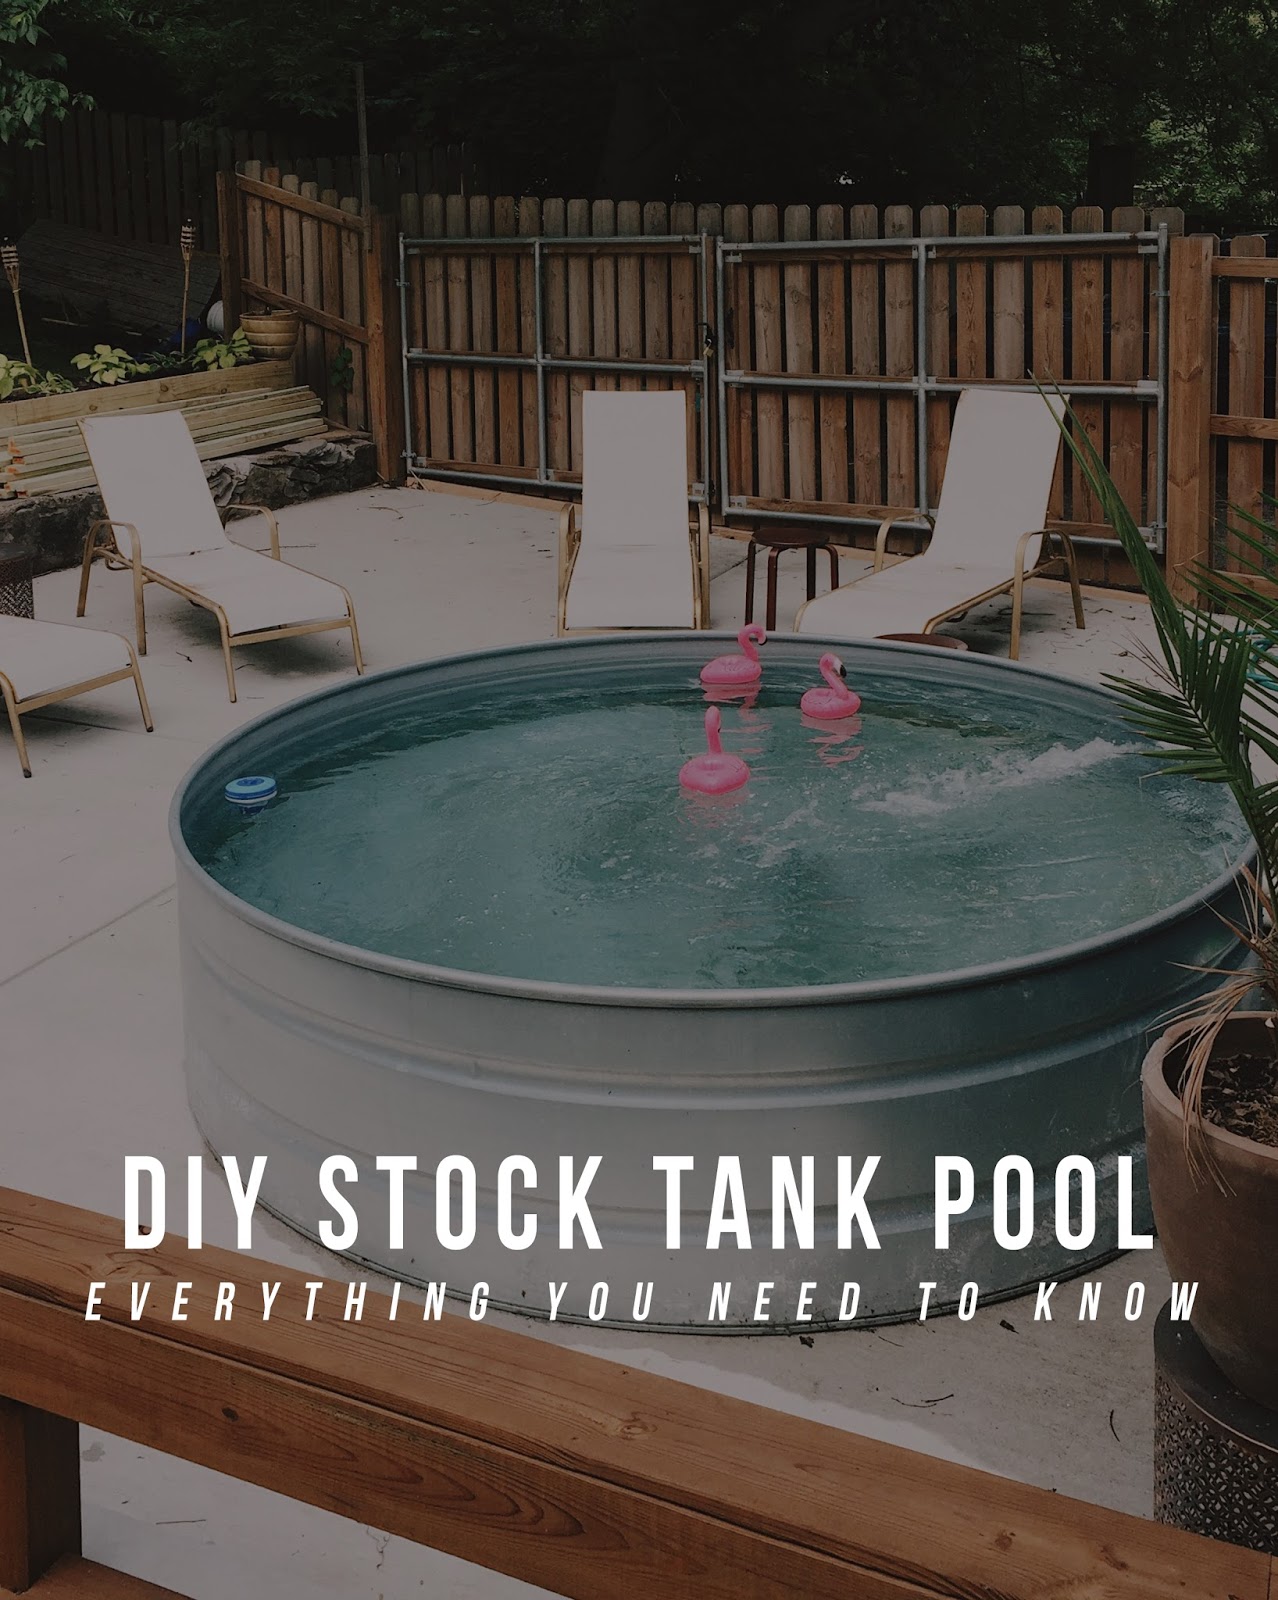 DIY Stock Tank Pool: Everything You Need To Know